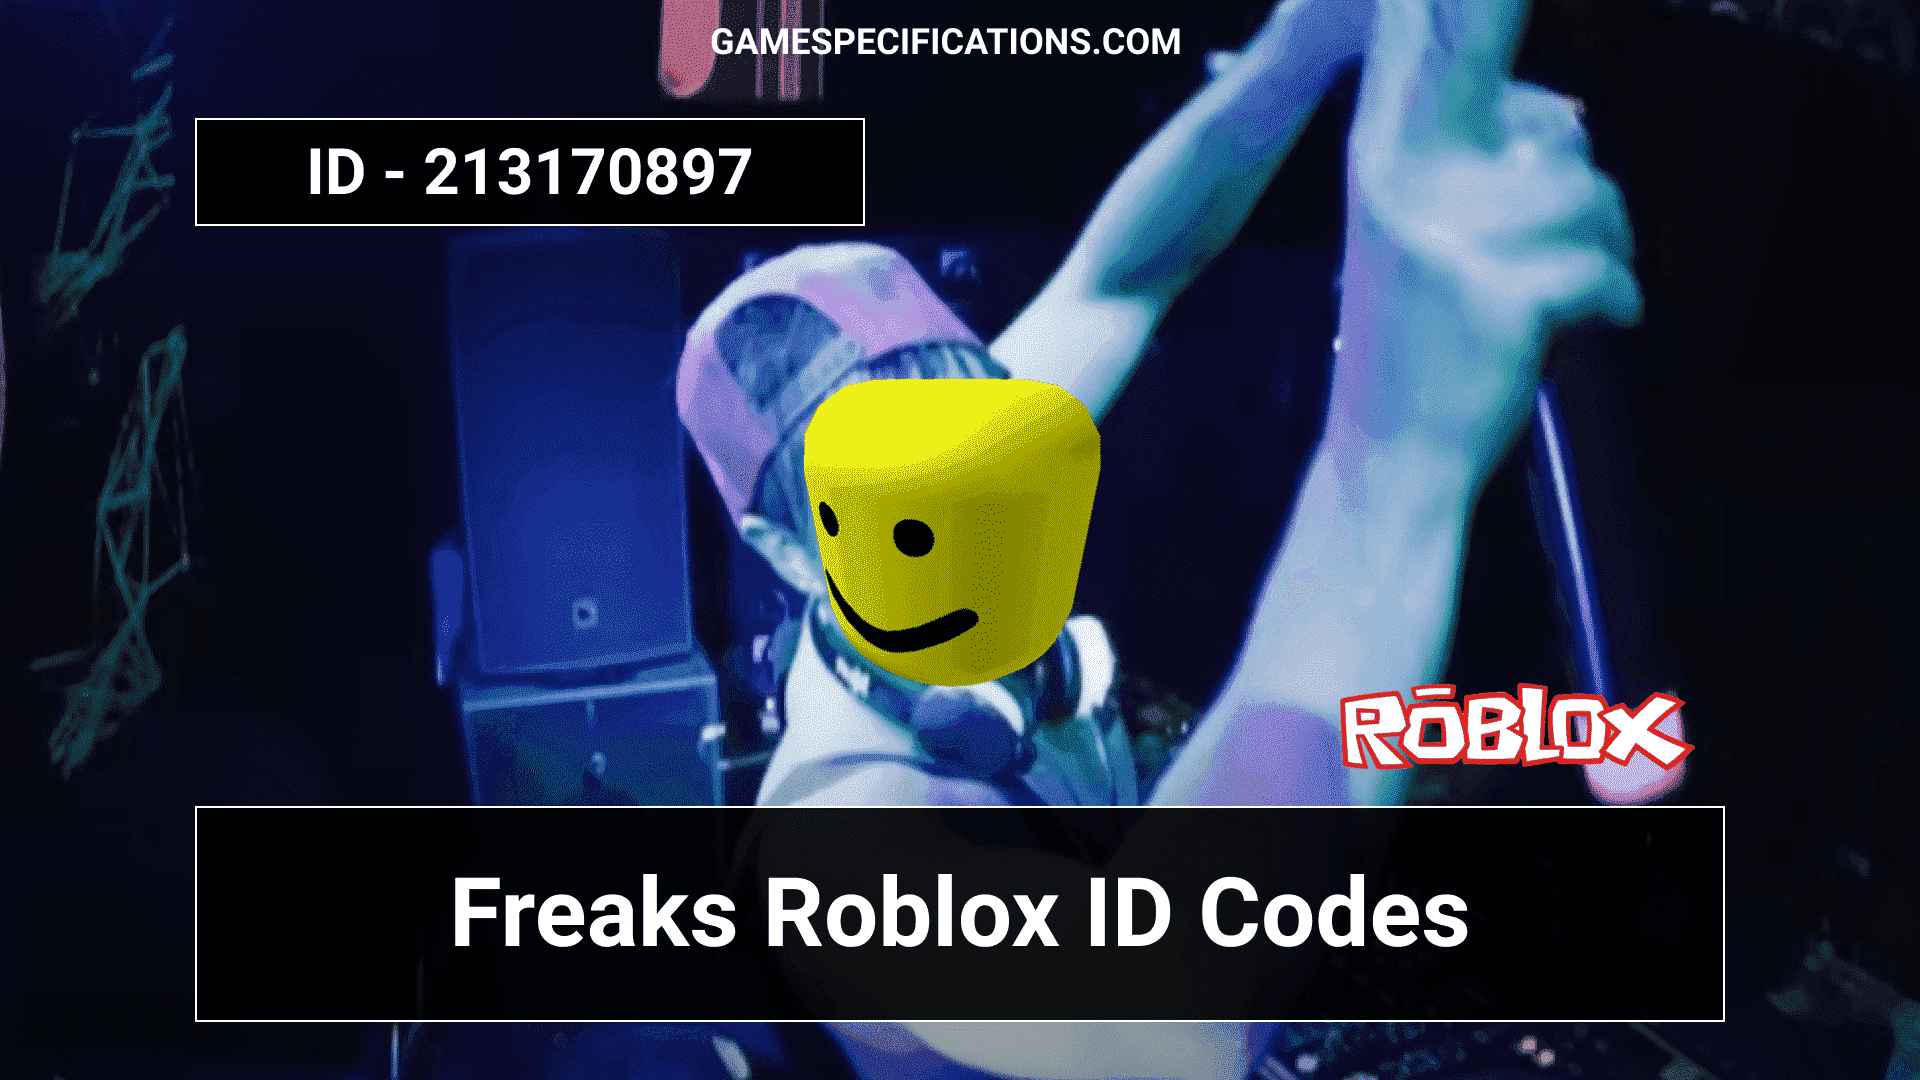 Complete Freaks Roblox Id Codes To Rock The Australian Music In Your Game Game Specifications - welcome home roblox id